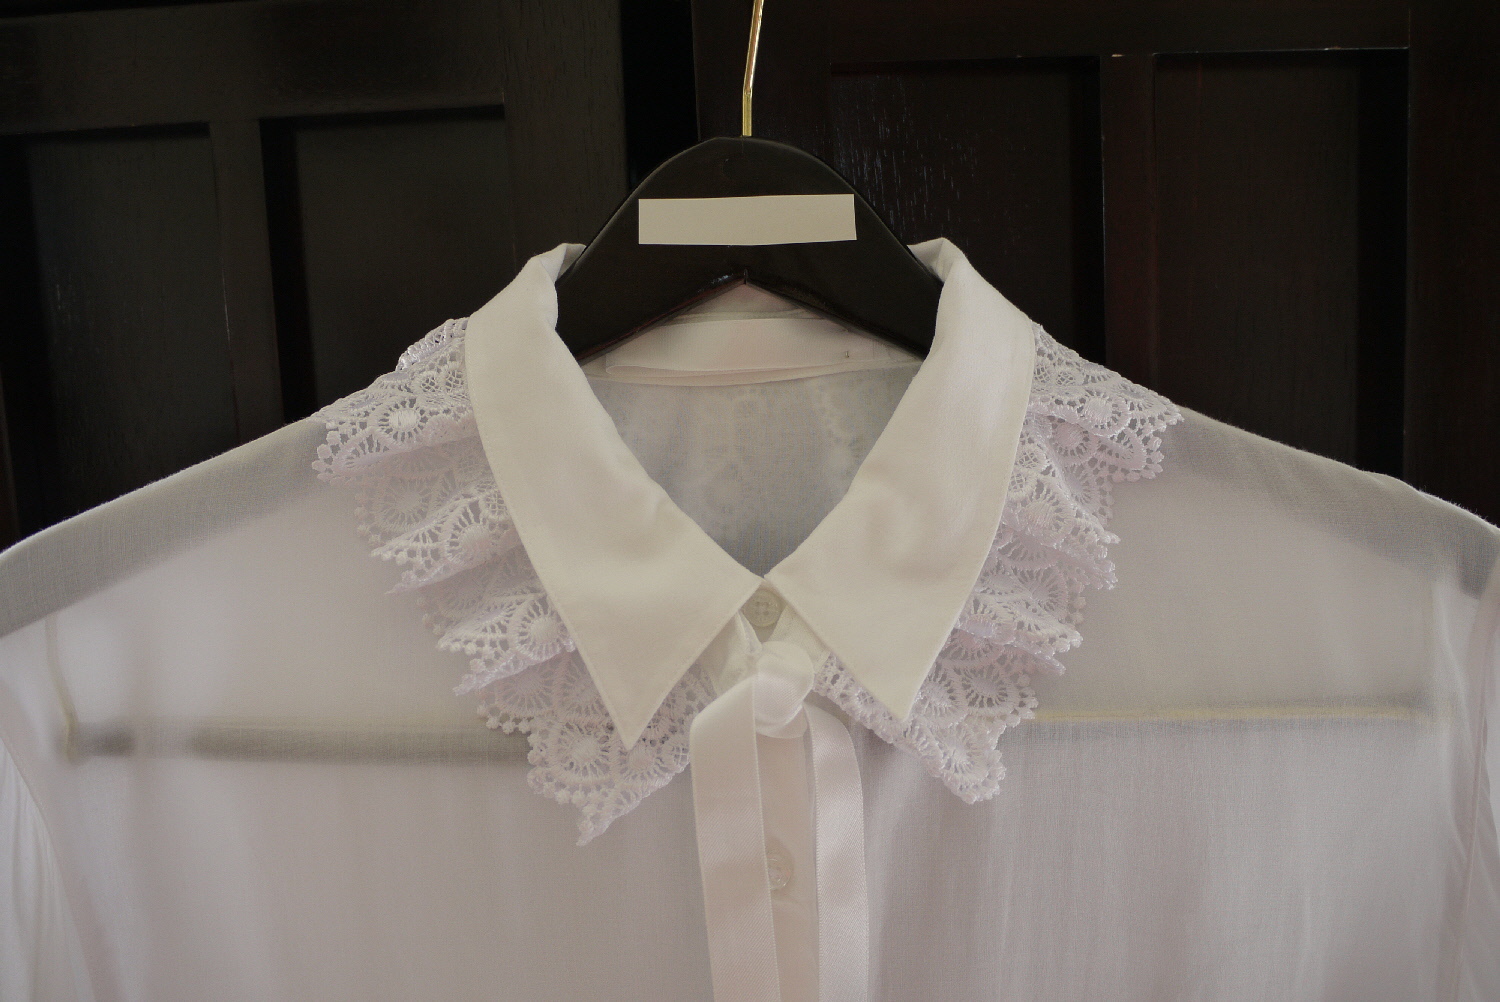 Category - Beautiful: Detachable White Lace Collar... DIY